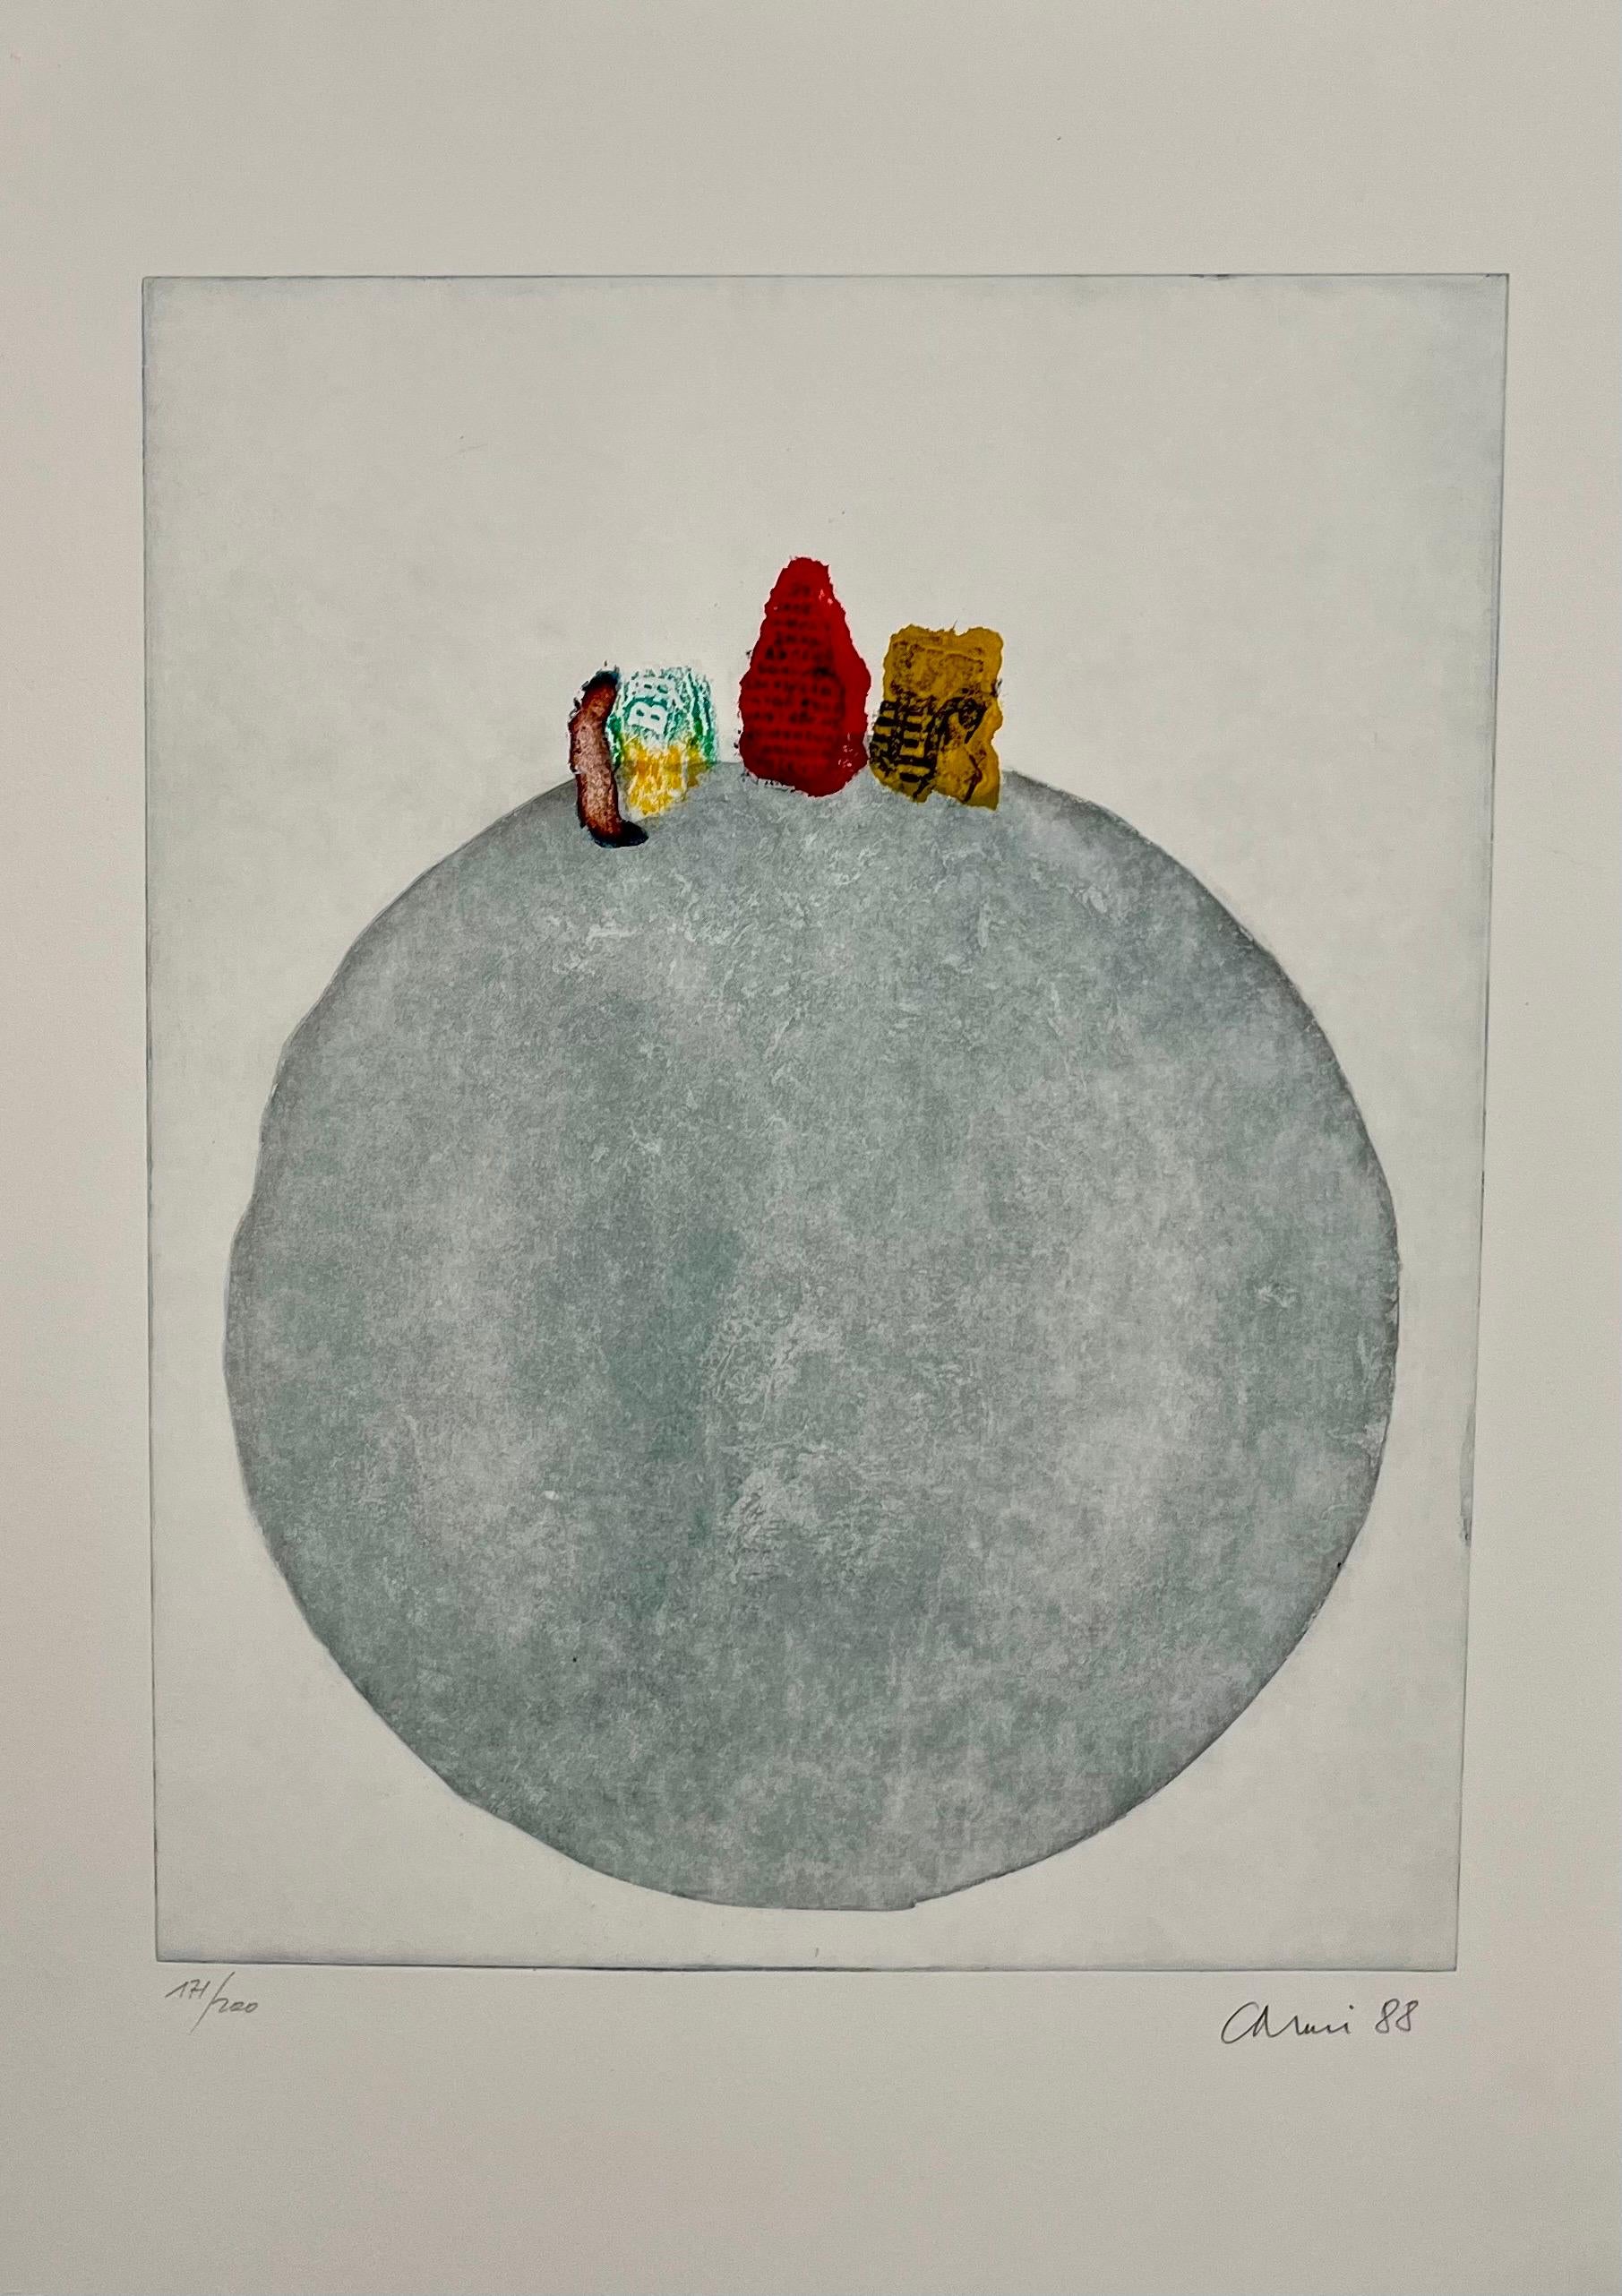 Genre: Modern, Modernist
Subject: Abstract
Medium: Print, Aquatint
Hand signed dated 1988, limited edition
Surface: Paper
Country: Italy
Dimensions: 26" x 20" approximately

Eugenio Carmi is an Italian painter born in 1920 in Genoa. He studied in